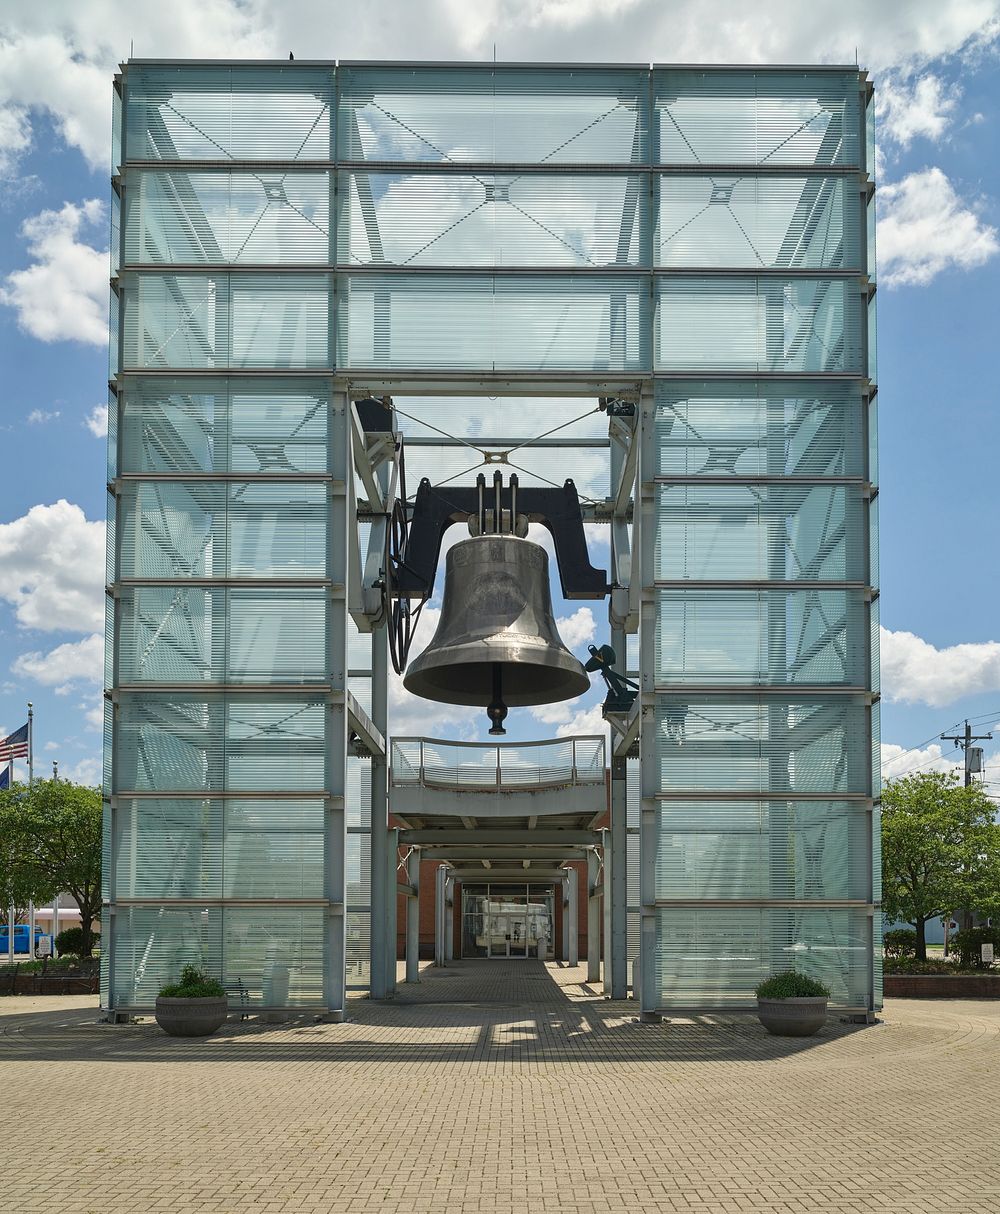                         The Newport, Kentucky, World Peace Bell was, for a period of six years from 2000 to 2006, the…